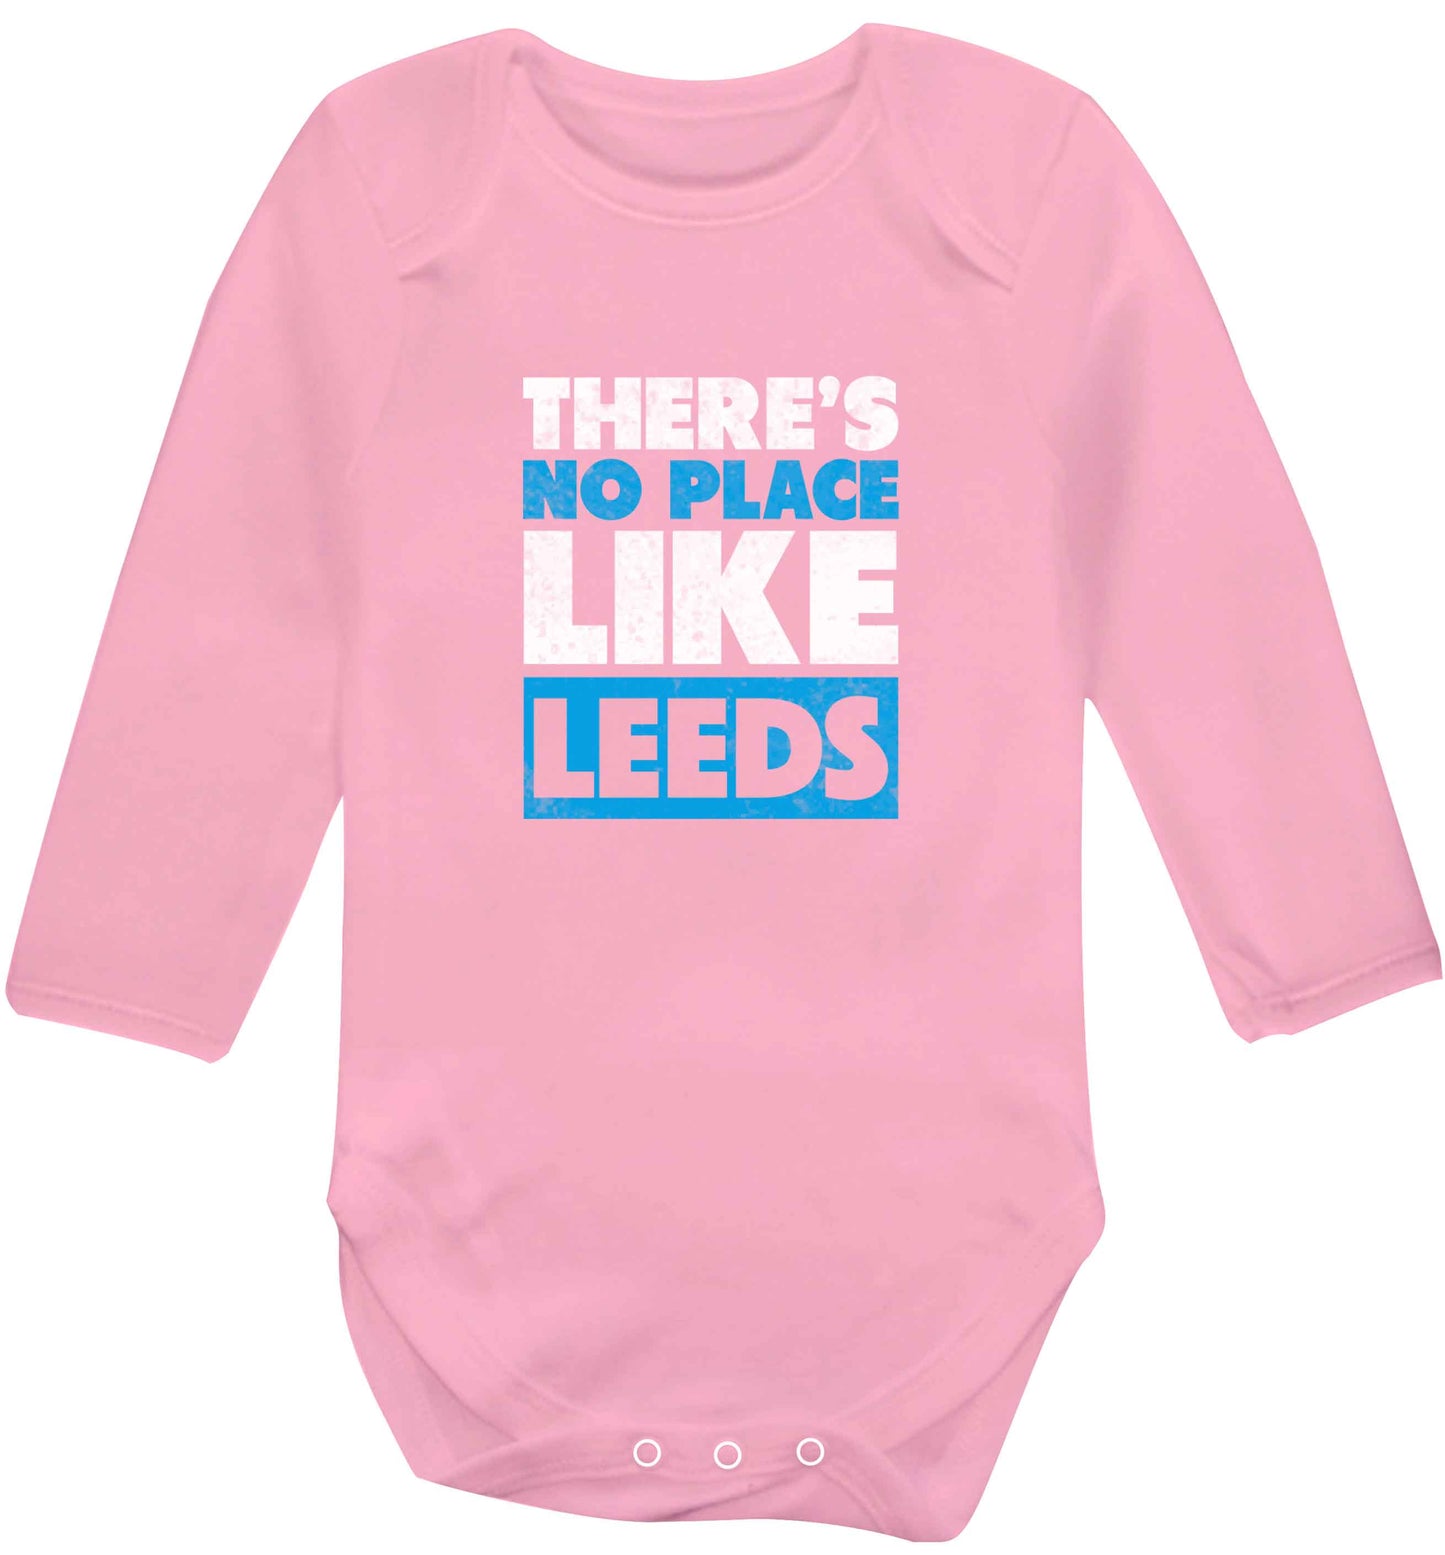 There's no place like Leeds baby vest long sleeved pale pink 6-12 months